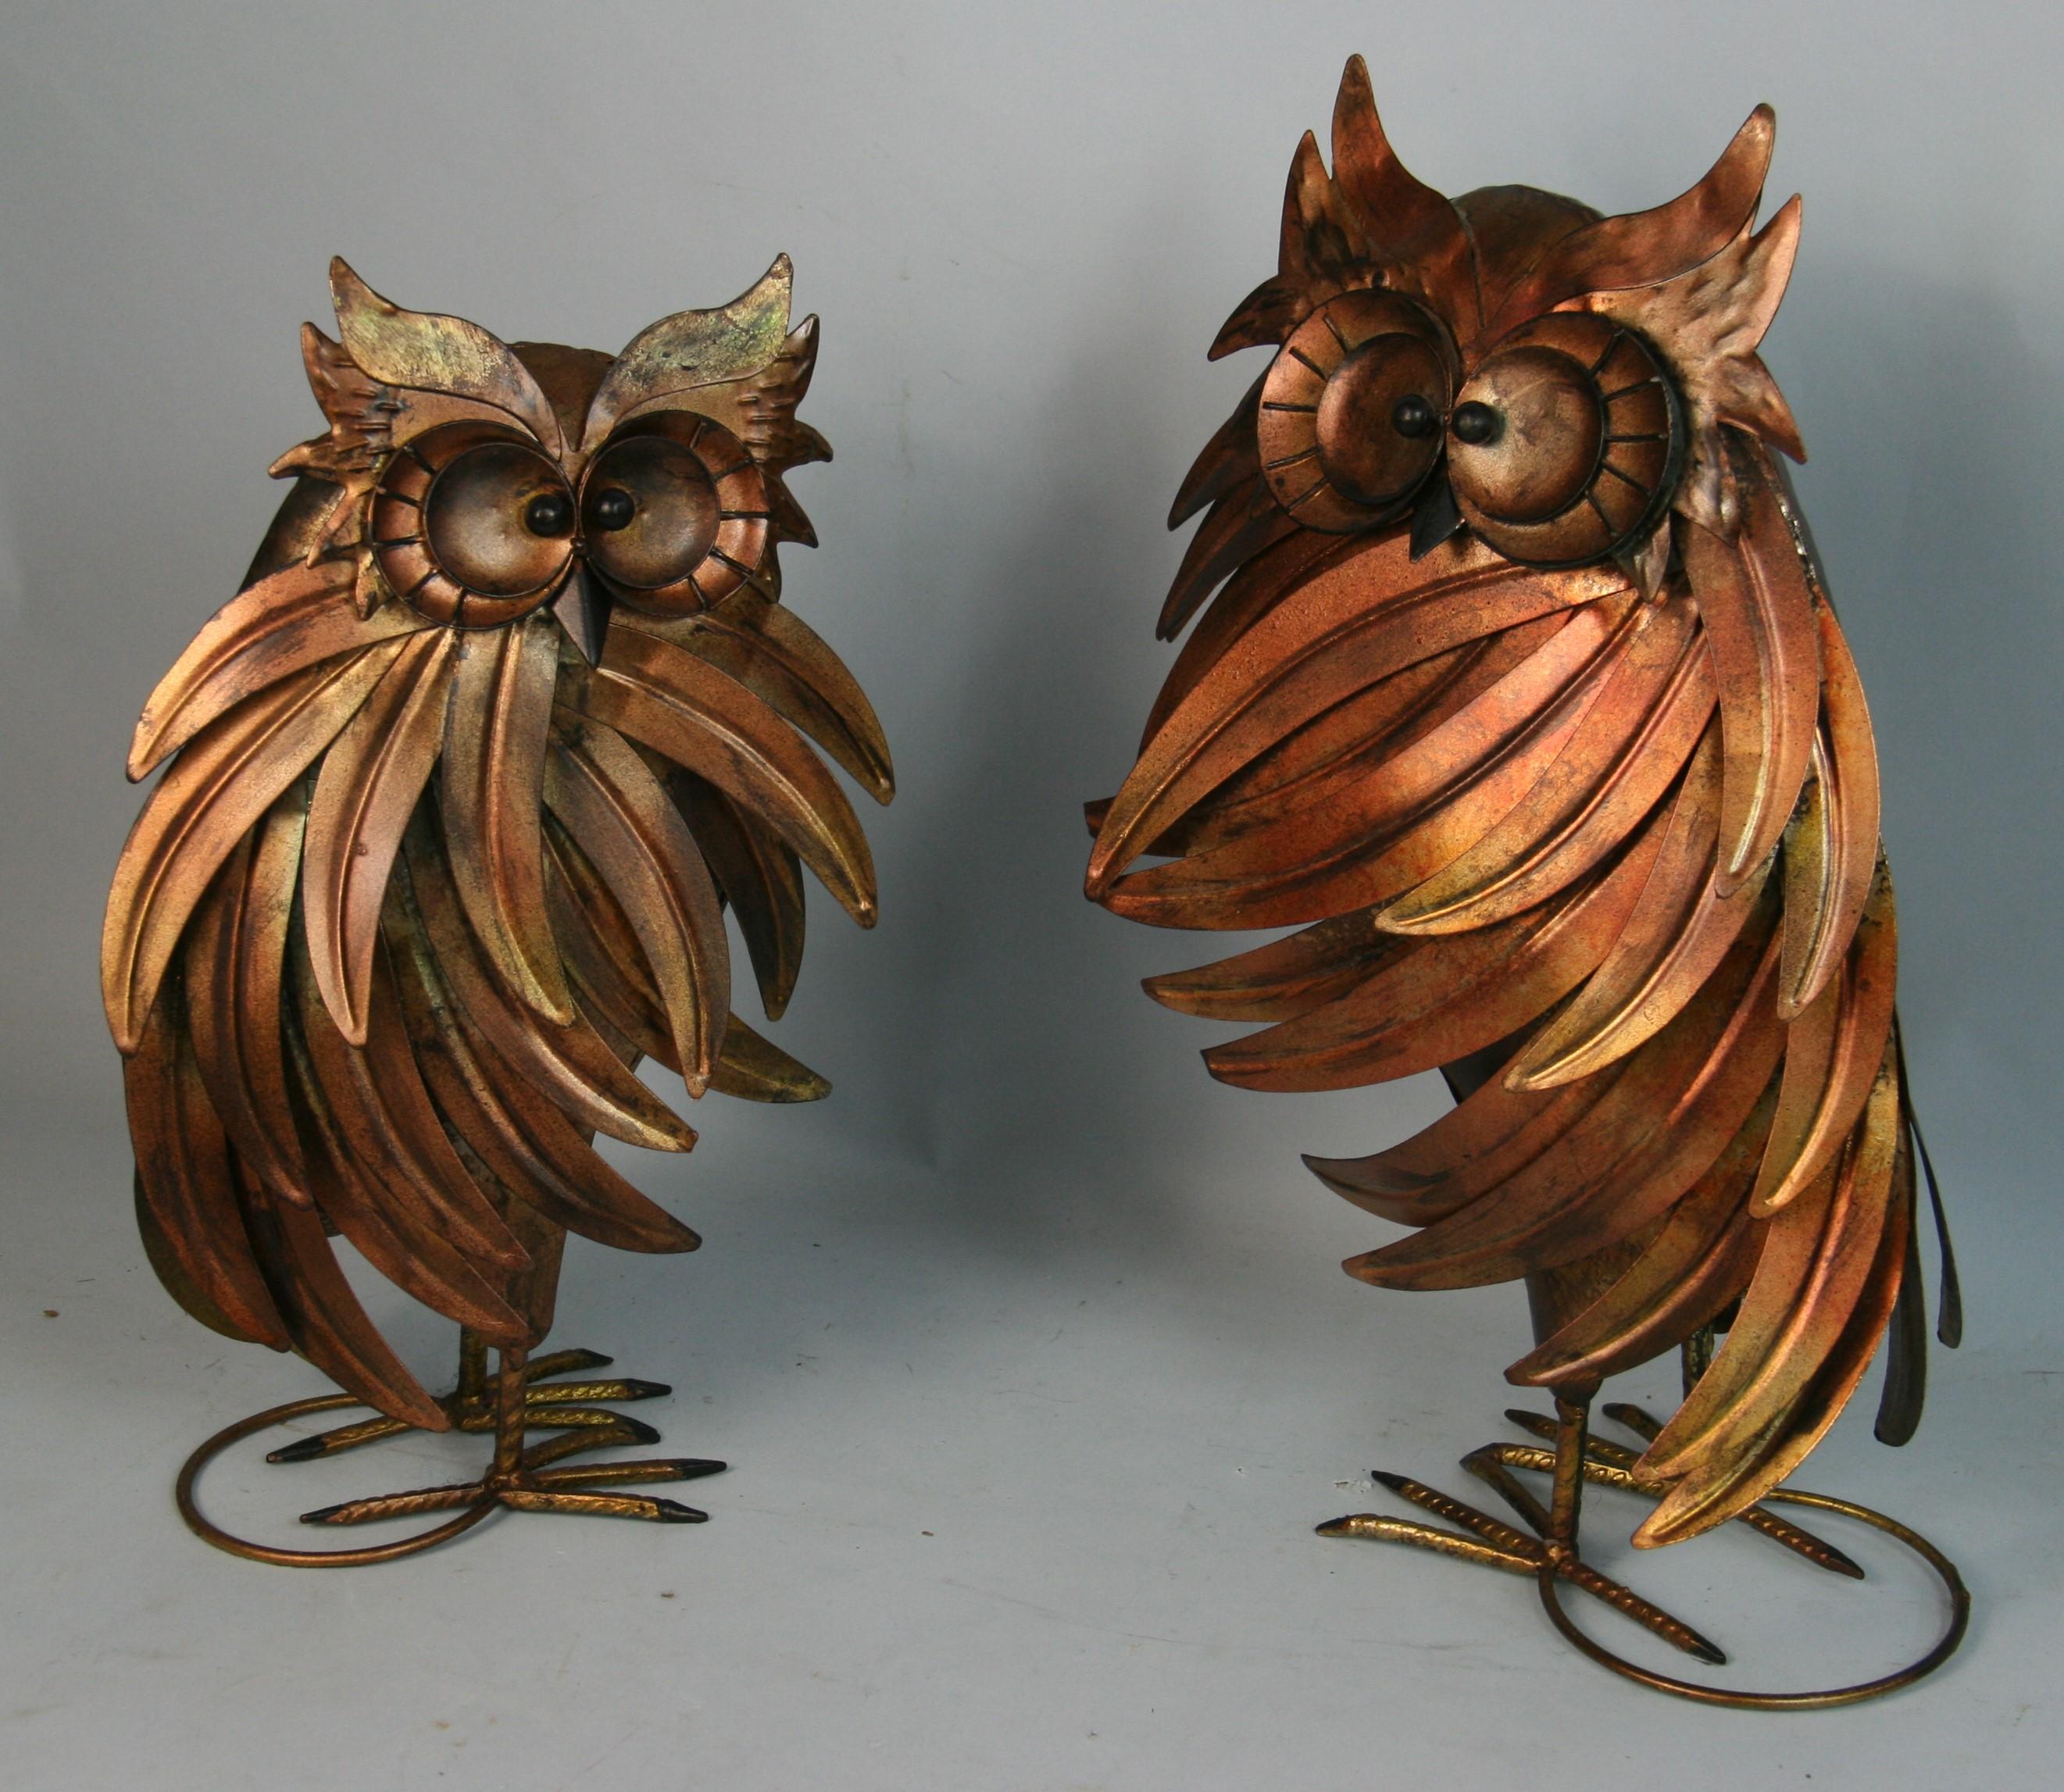 1548 Pair large hand made and decorated matched pair metal owls
Large 16.5x10x6